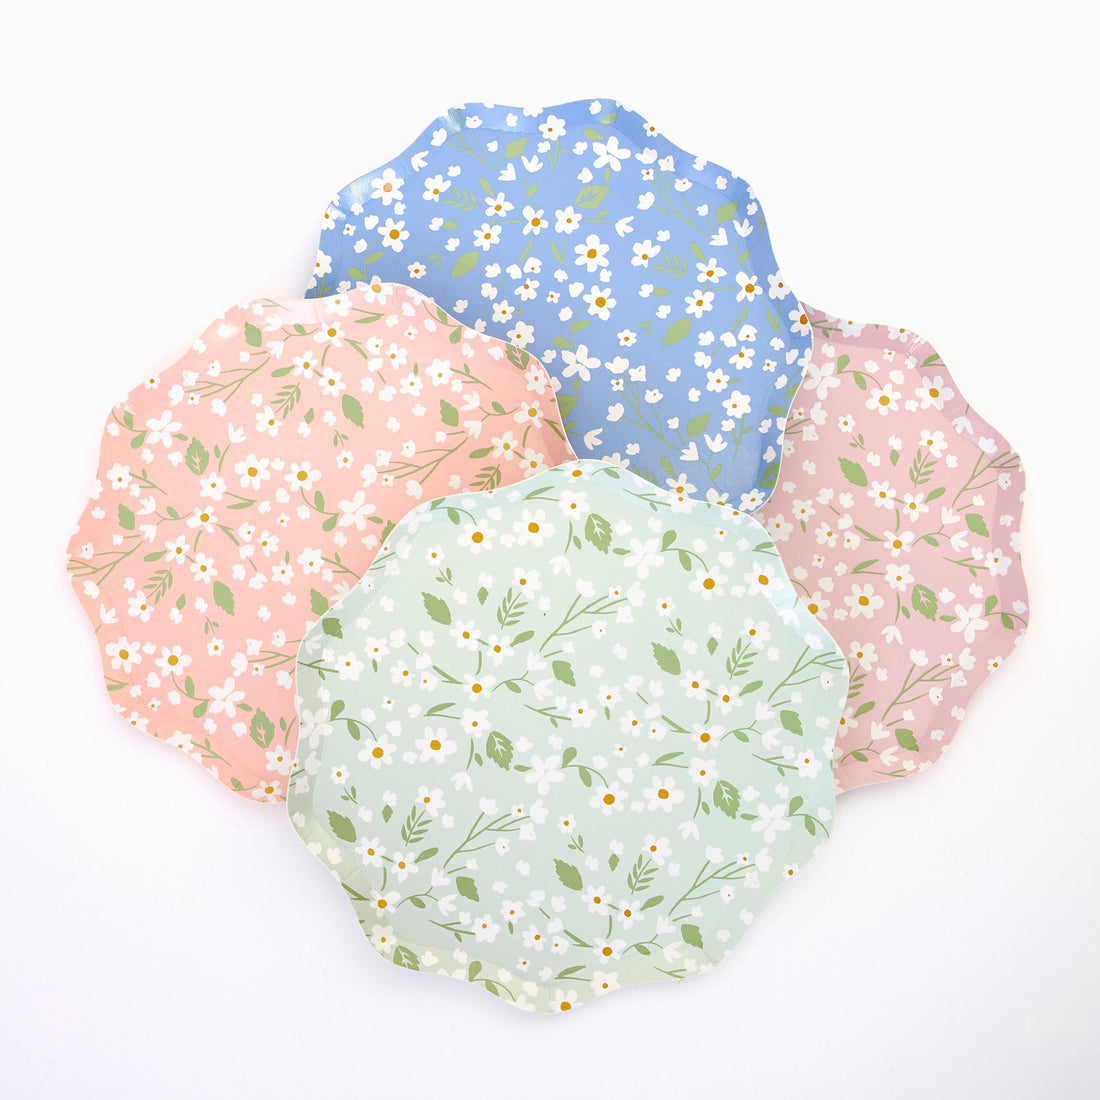 A set of four Ditsy Floral Plates with a floral pattern of daisies on them by Meri Meri.